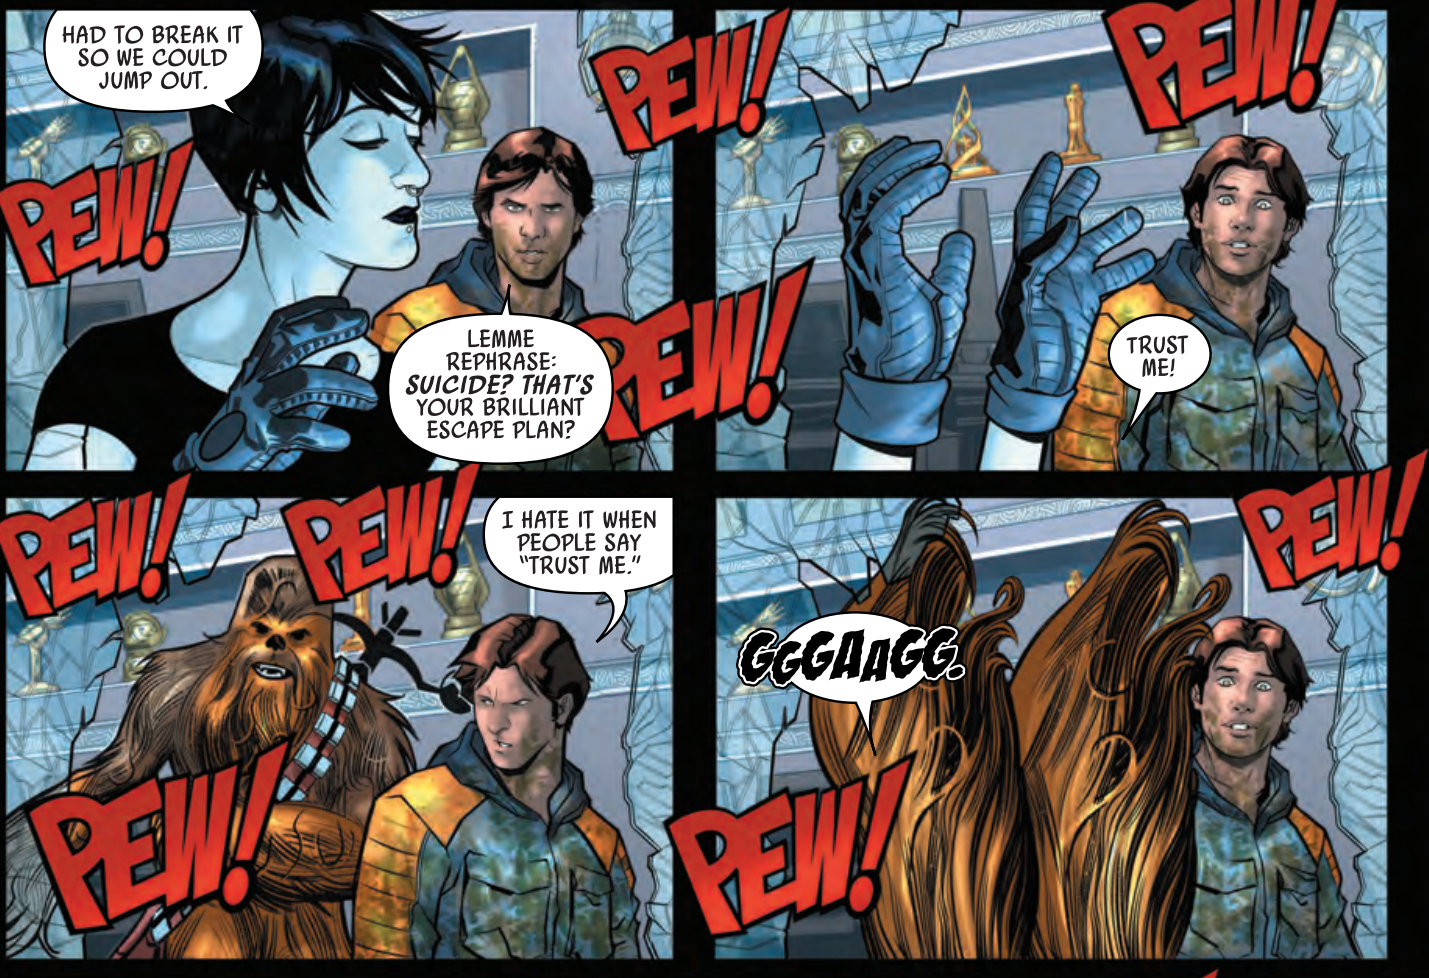 Panels from Han Solo & Chewbacca #8